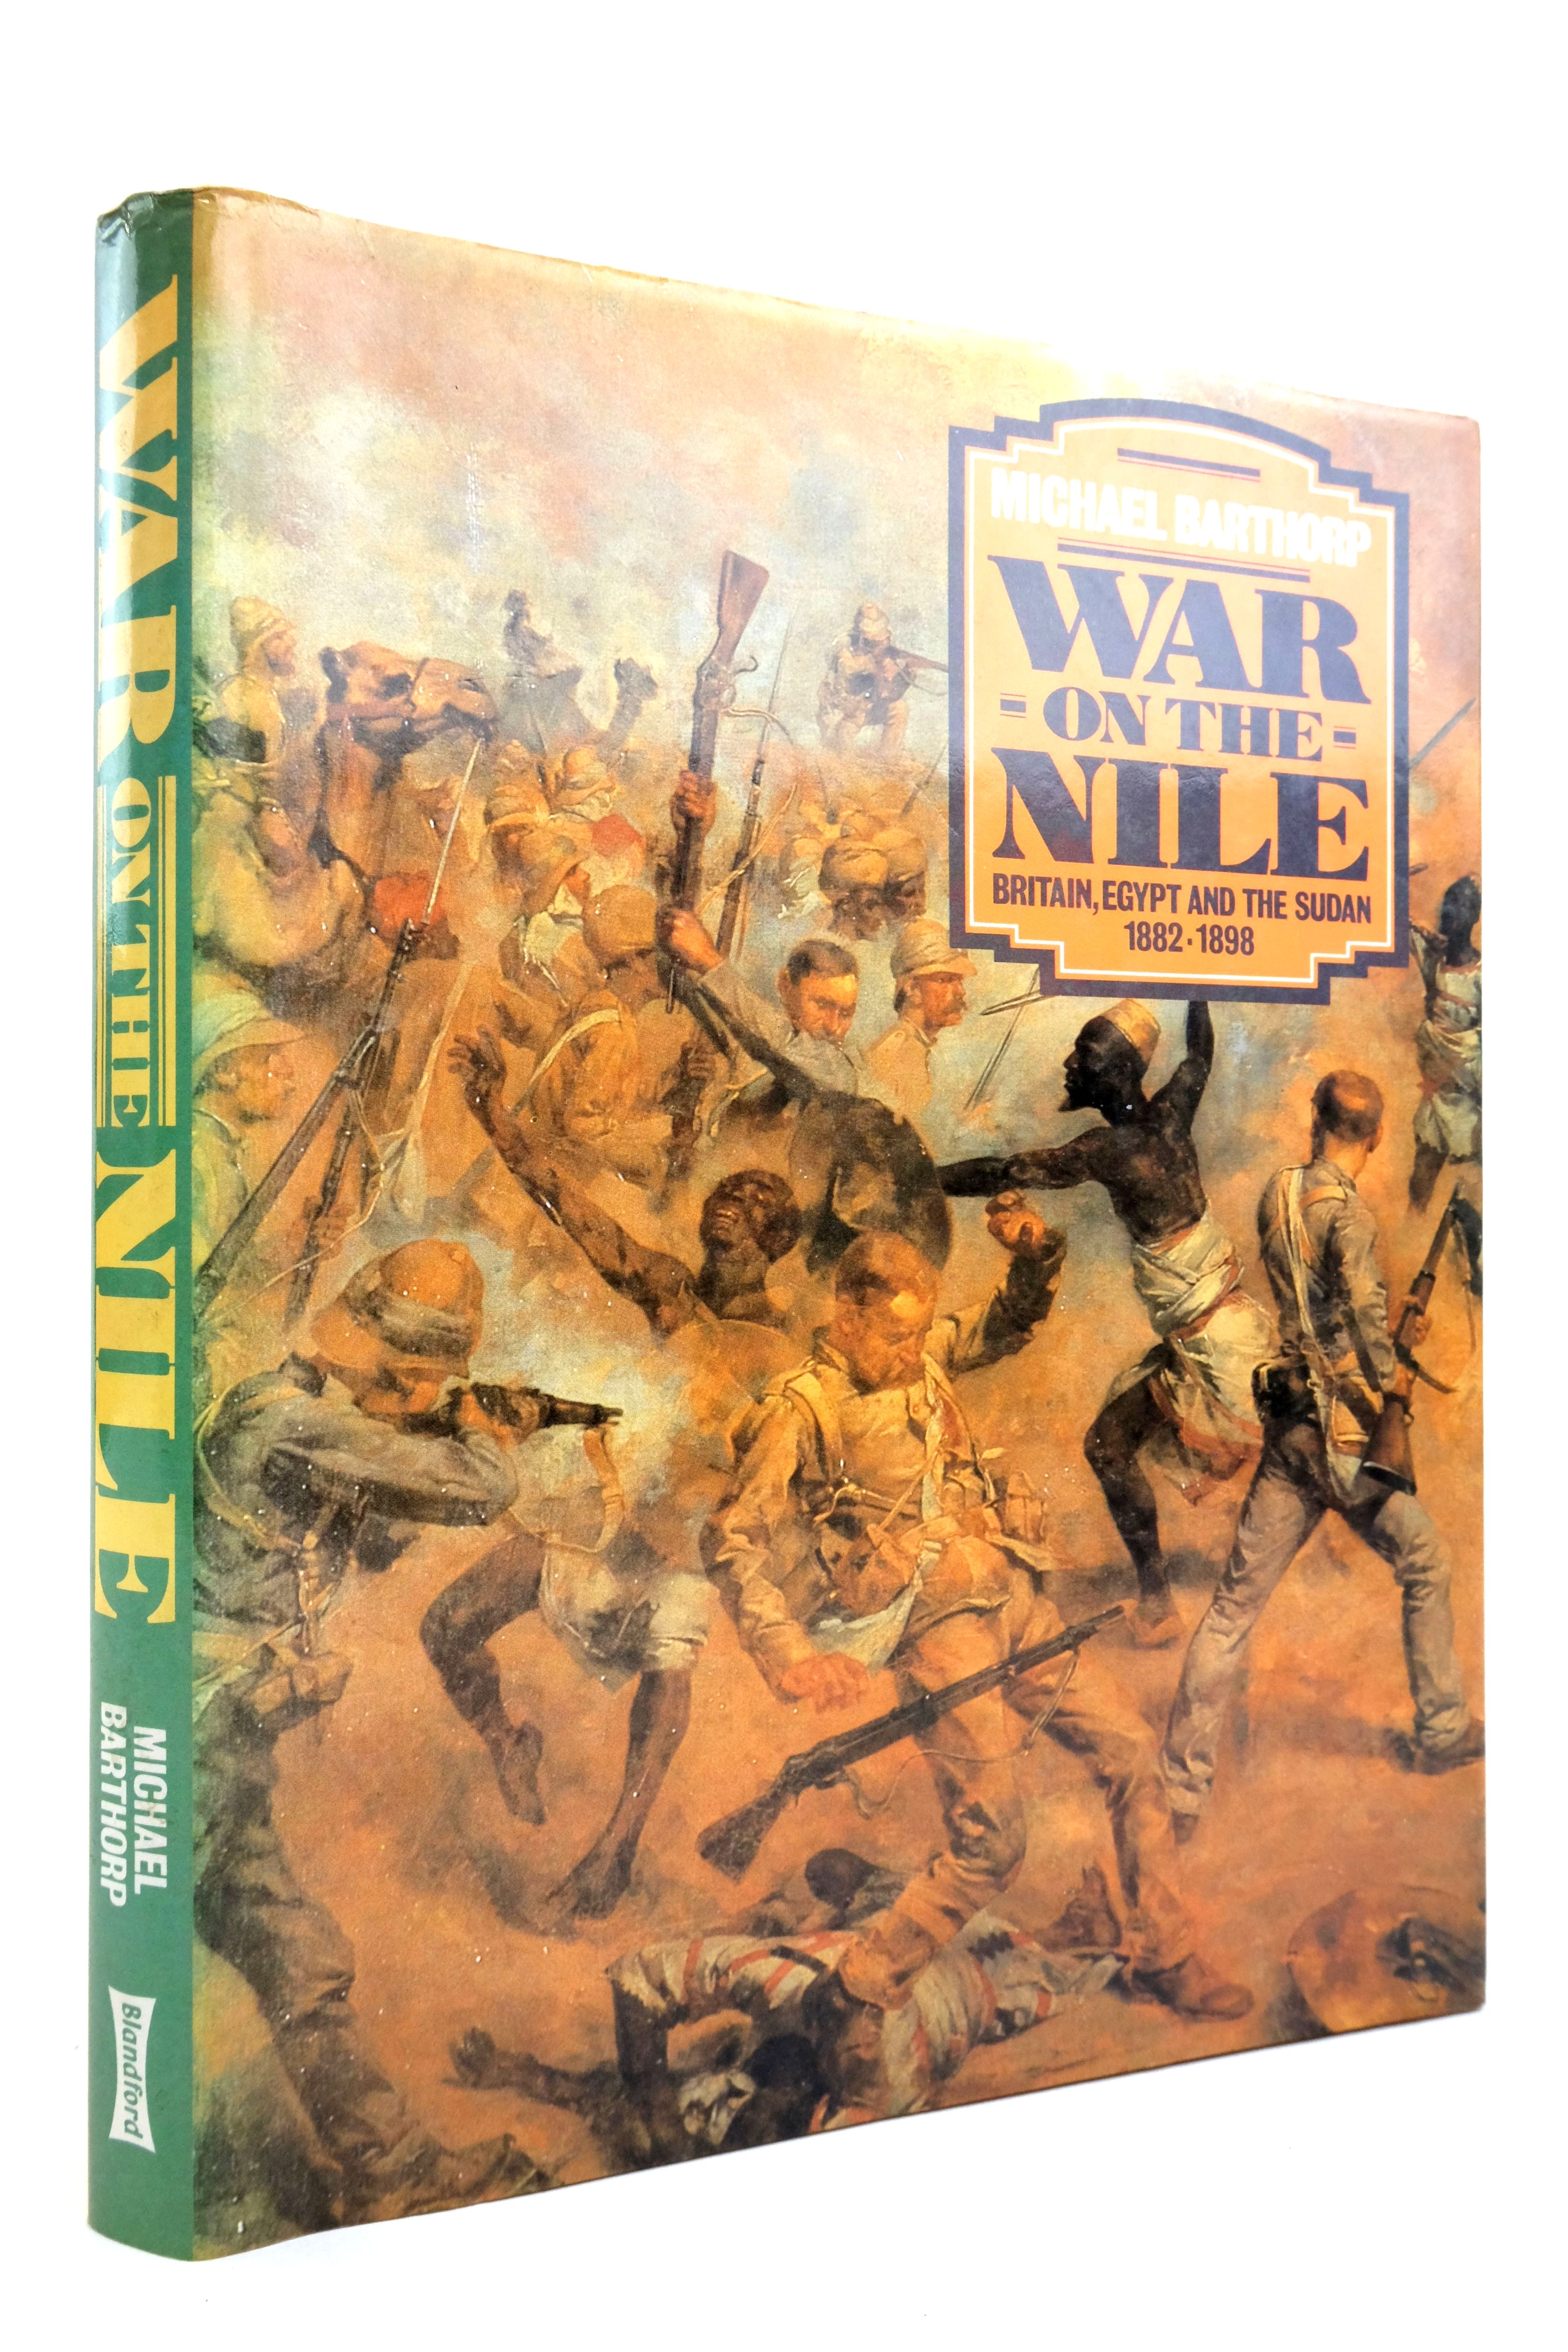 Photo of WAR ON THE NILE written by Barthorp, Michael published by Blandford Press (STOCK CODE: 2135531)  for sale by Stella & Rose's Books